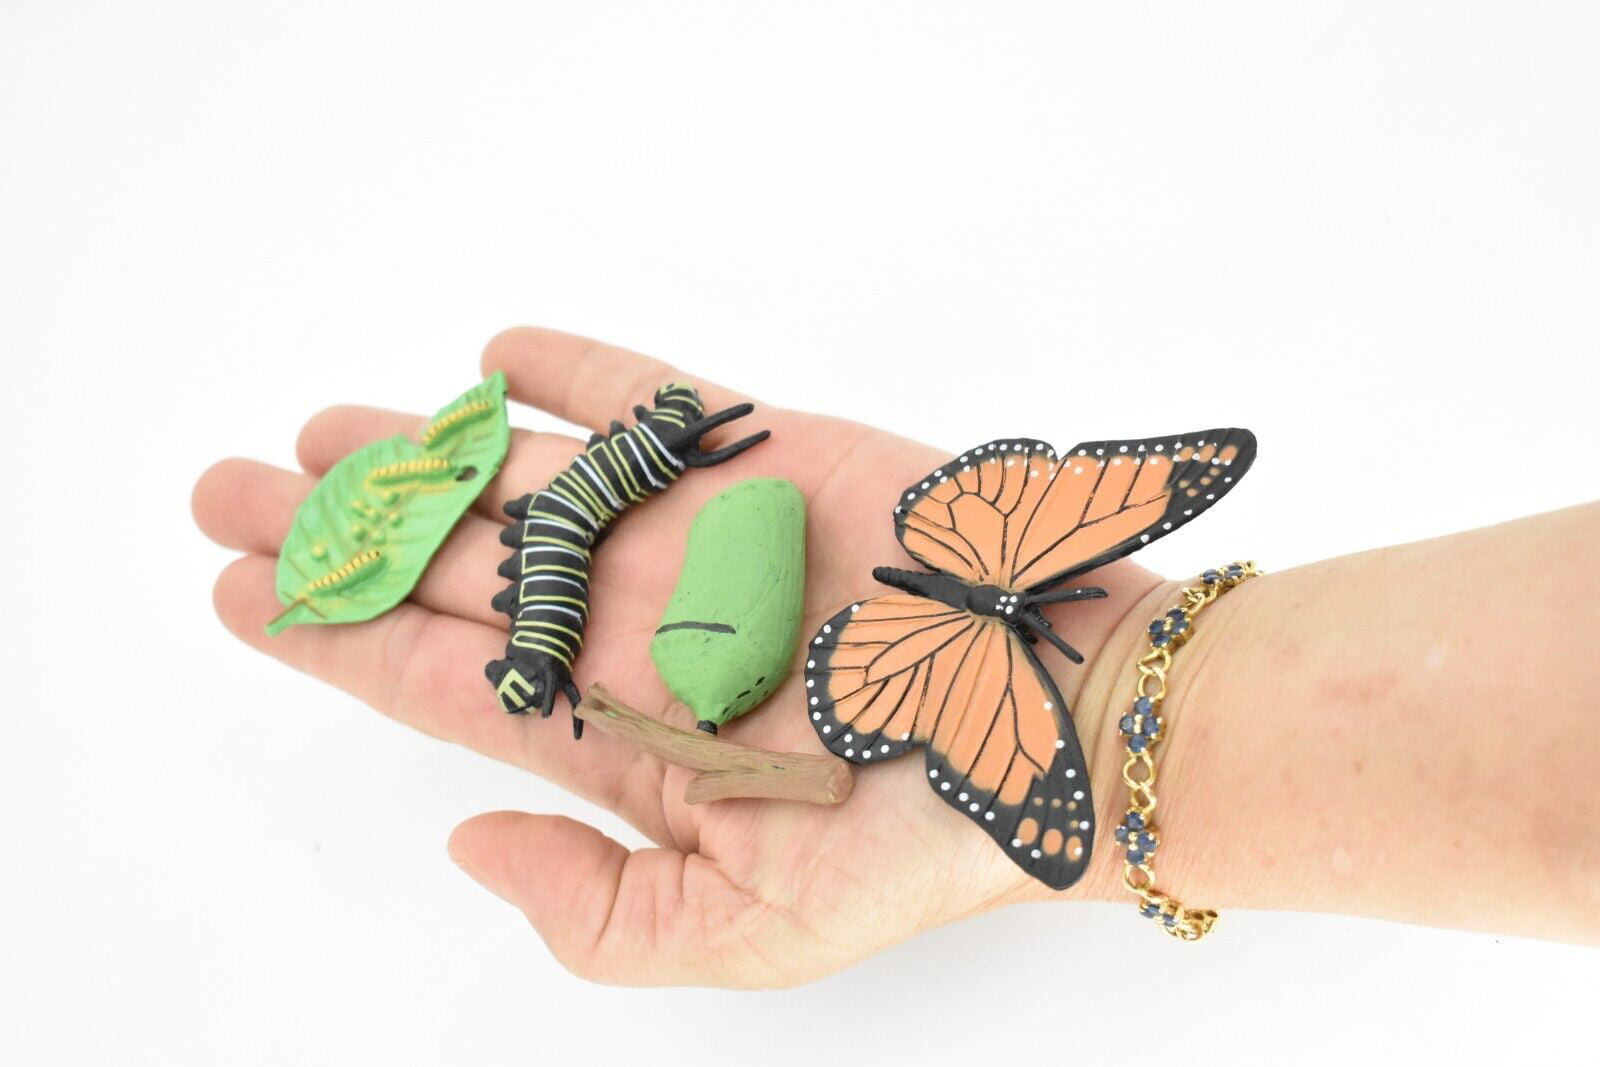 Life cycle figurines of a Monarch butterfly - Safari Ltd